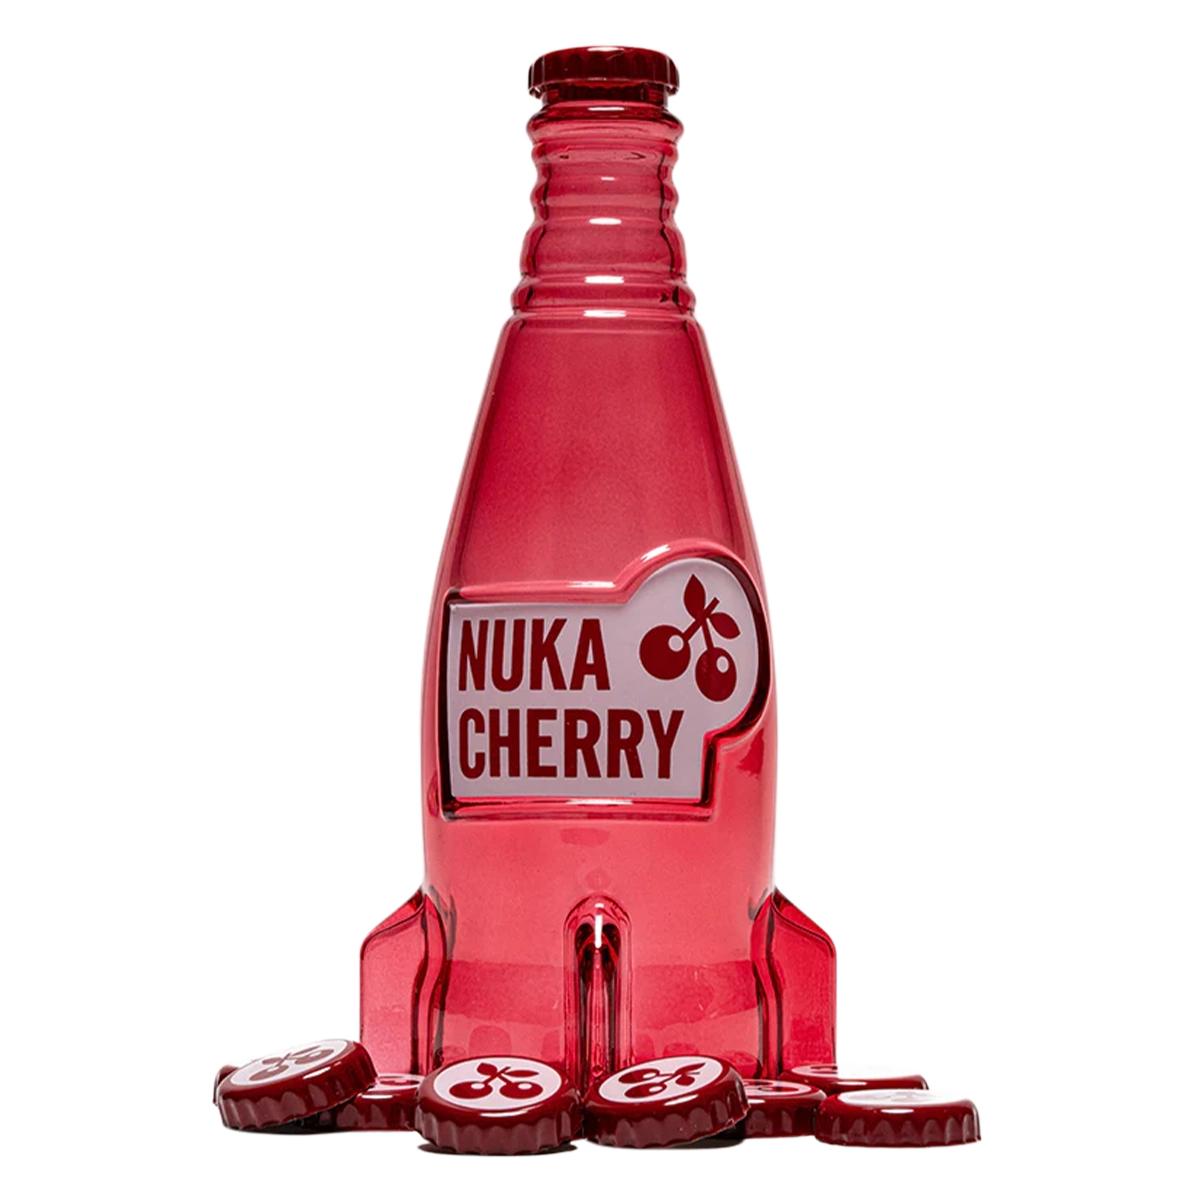 Fallout "Nuka Cola Cherry" Glass Bottle and Caps Cover